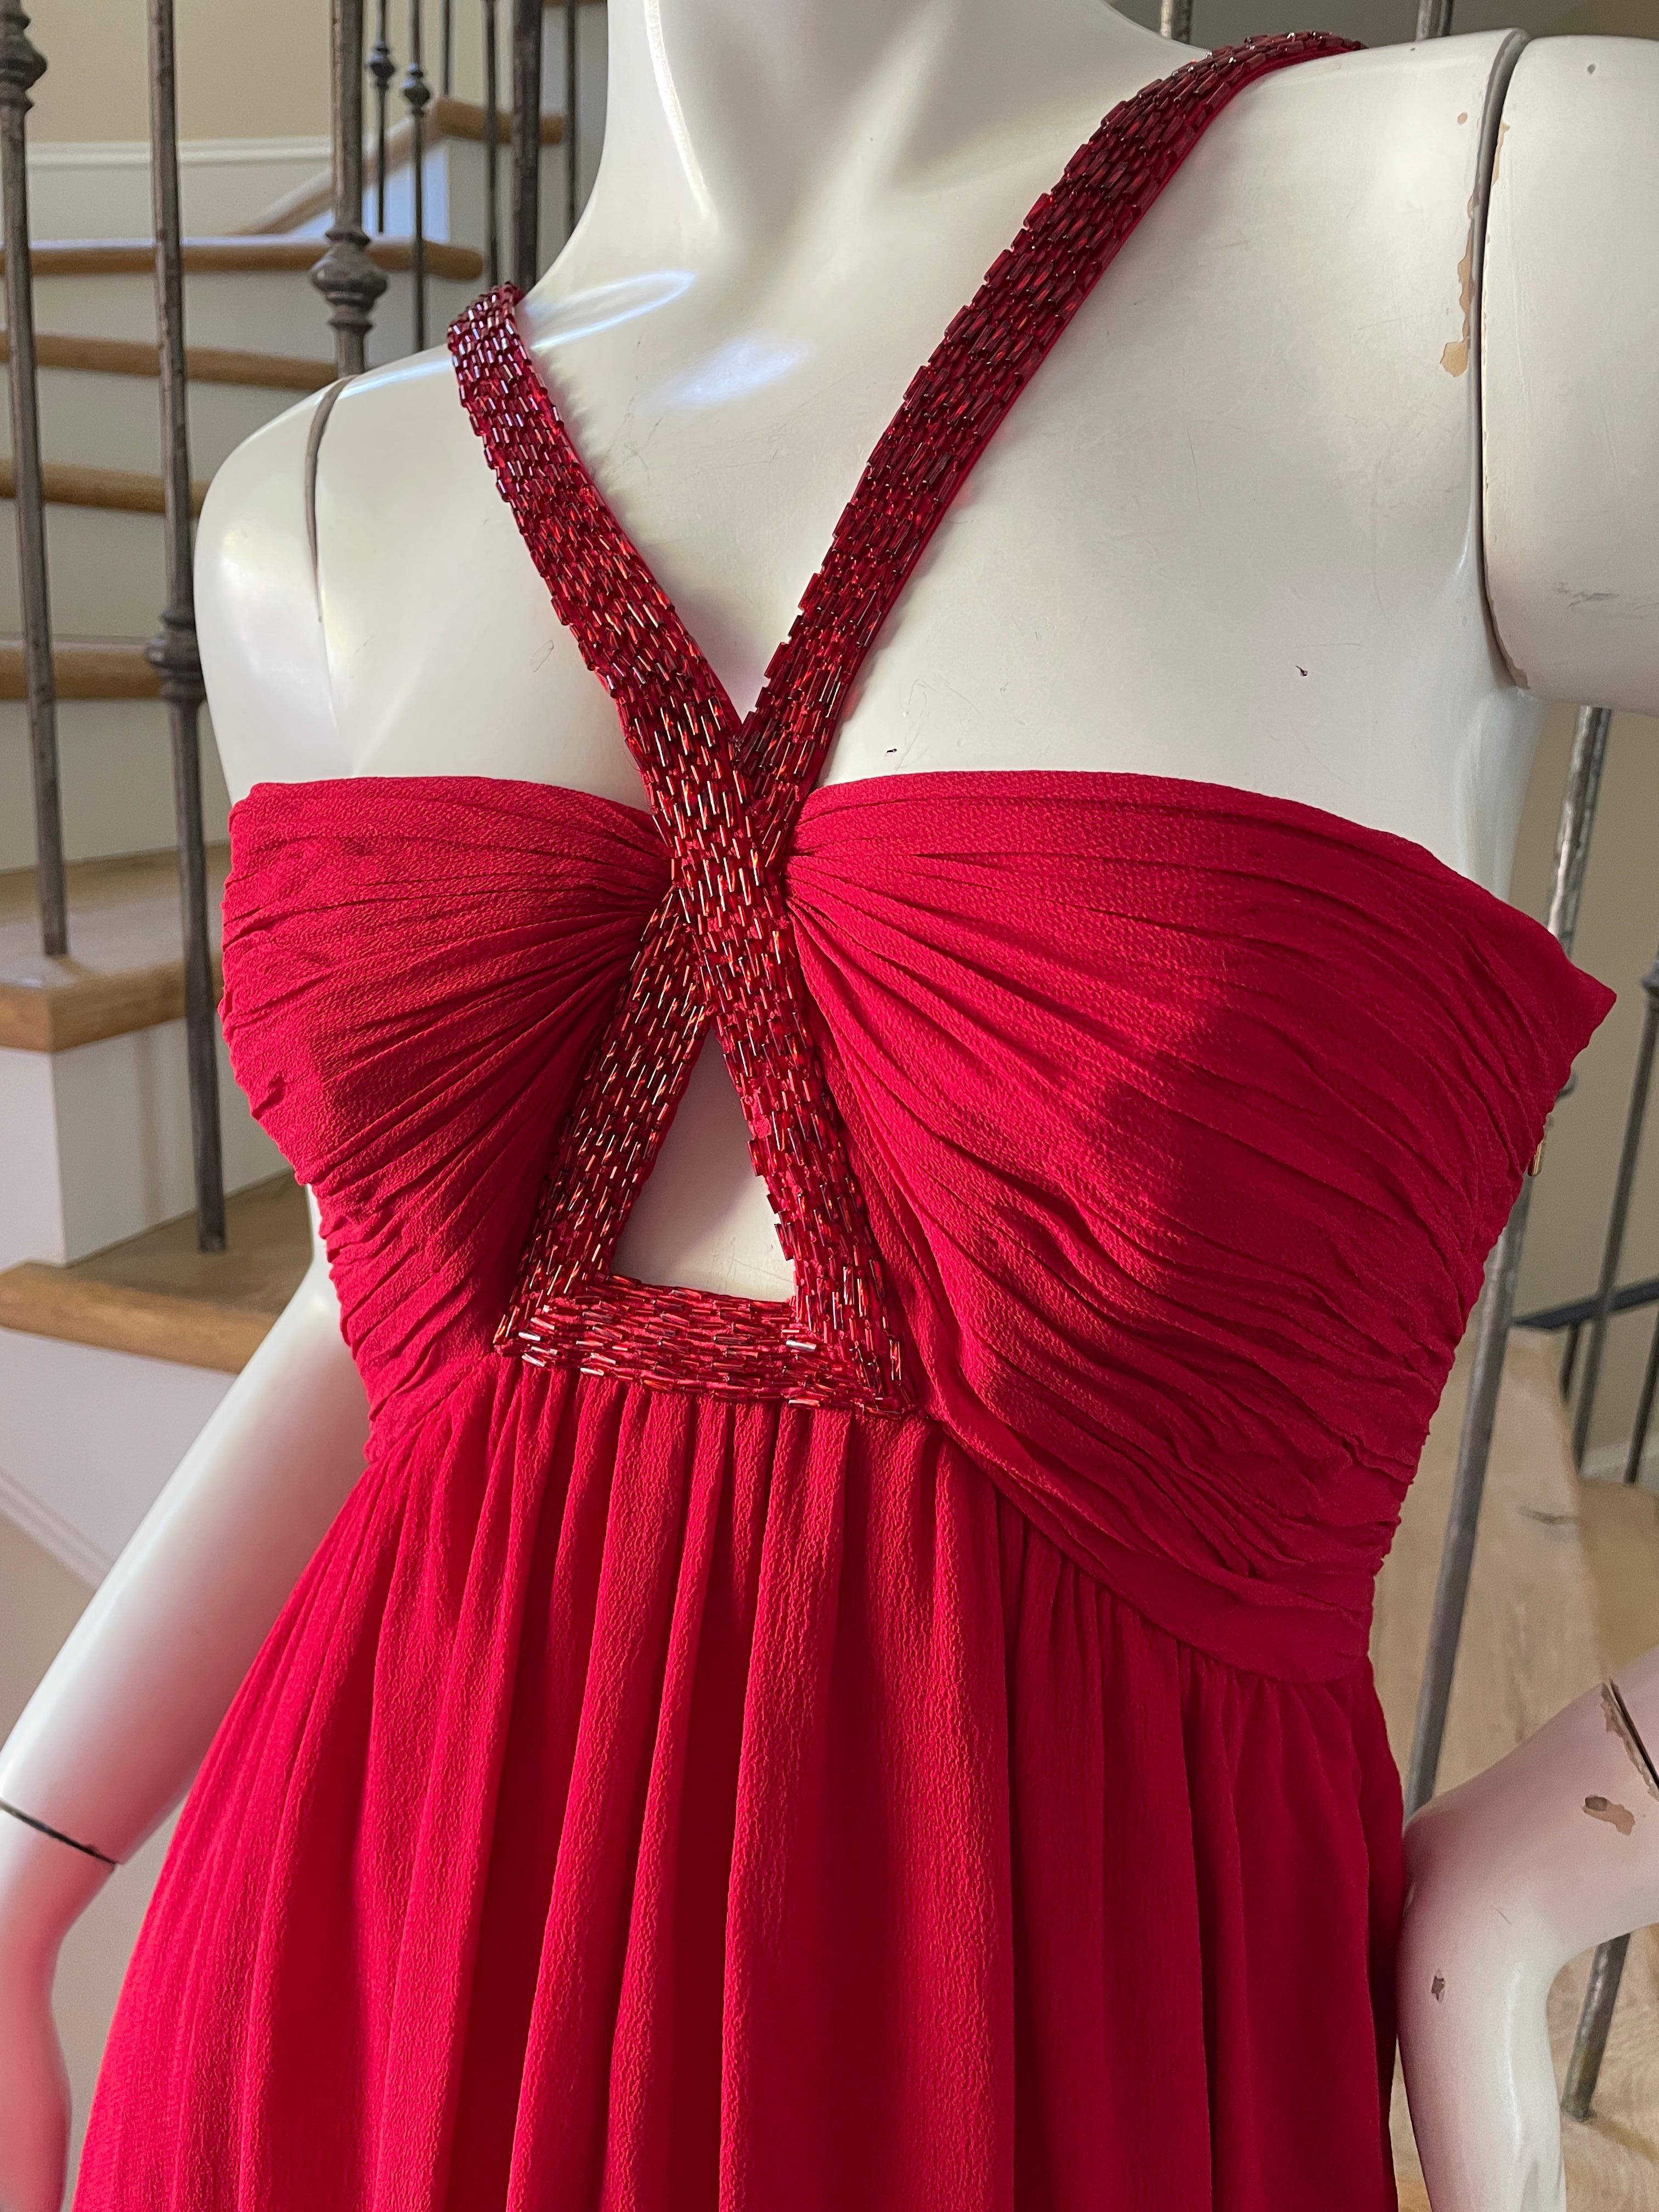 Roberto Cavalli Vintage Red Silk Evening Dress with Keyhole Beaded Details.
This is so petty, much better on .
Size 38-40 (fabric and size tags removed)
 Bust 34